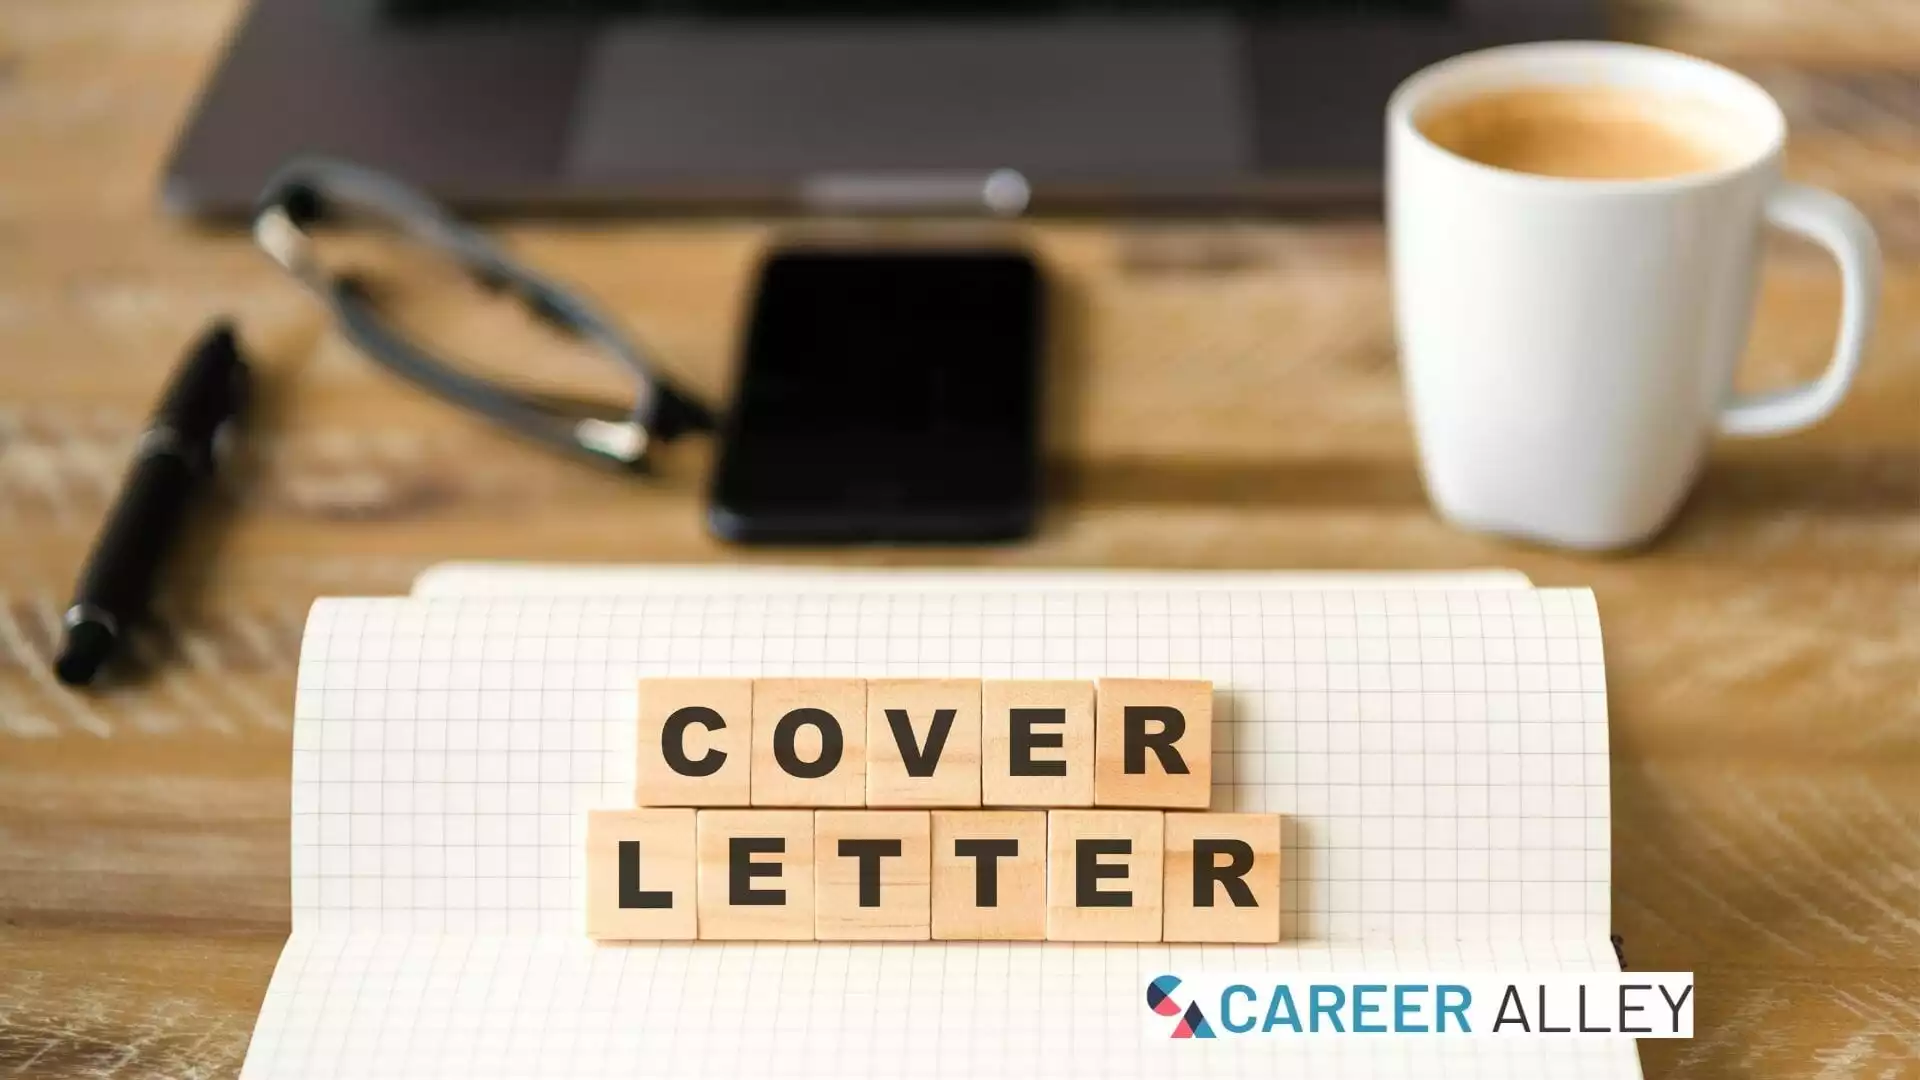 9 Must-Read Books for Crafting the Perfect Cover Letter